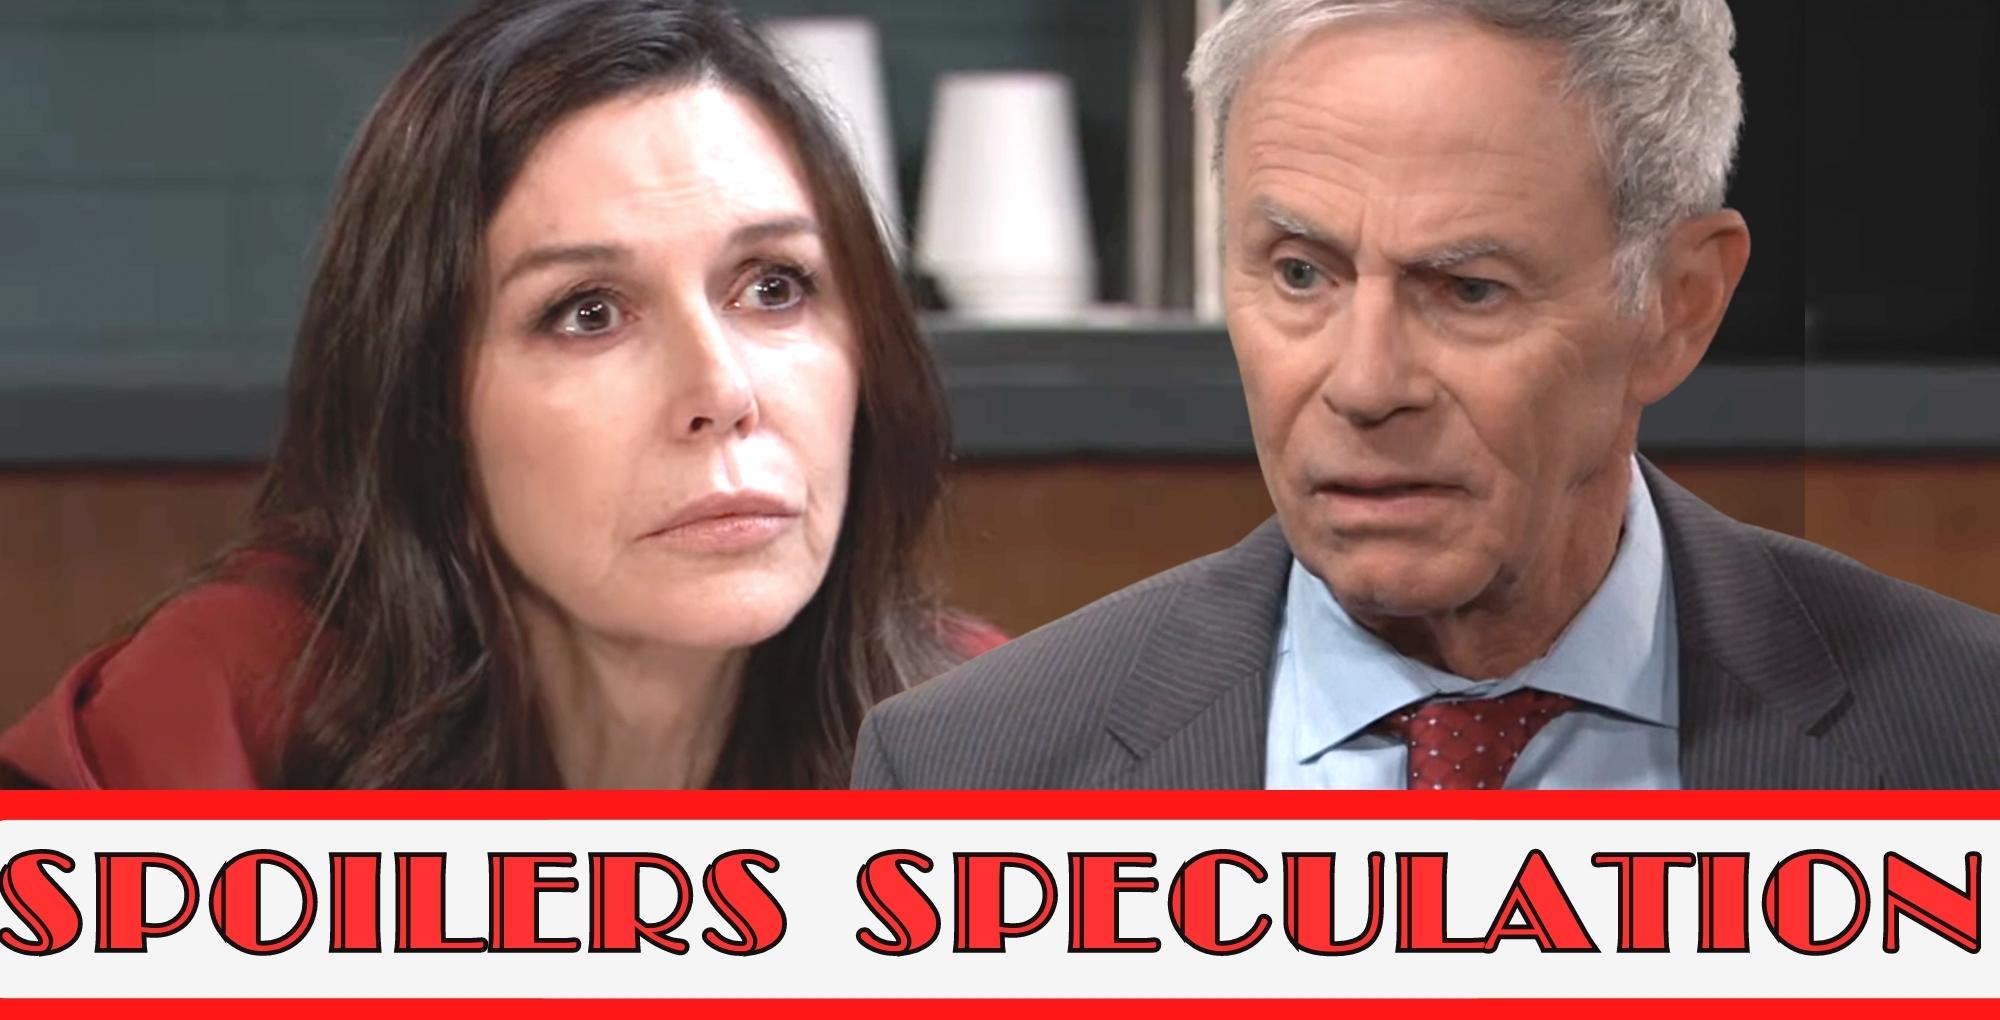 gh spoilers speculation about anna devane and robert scorpio.